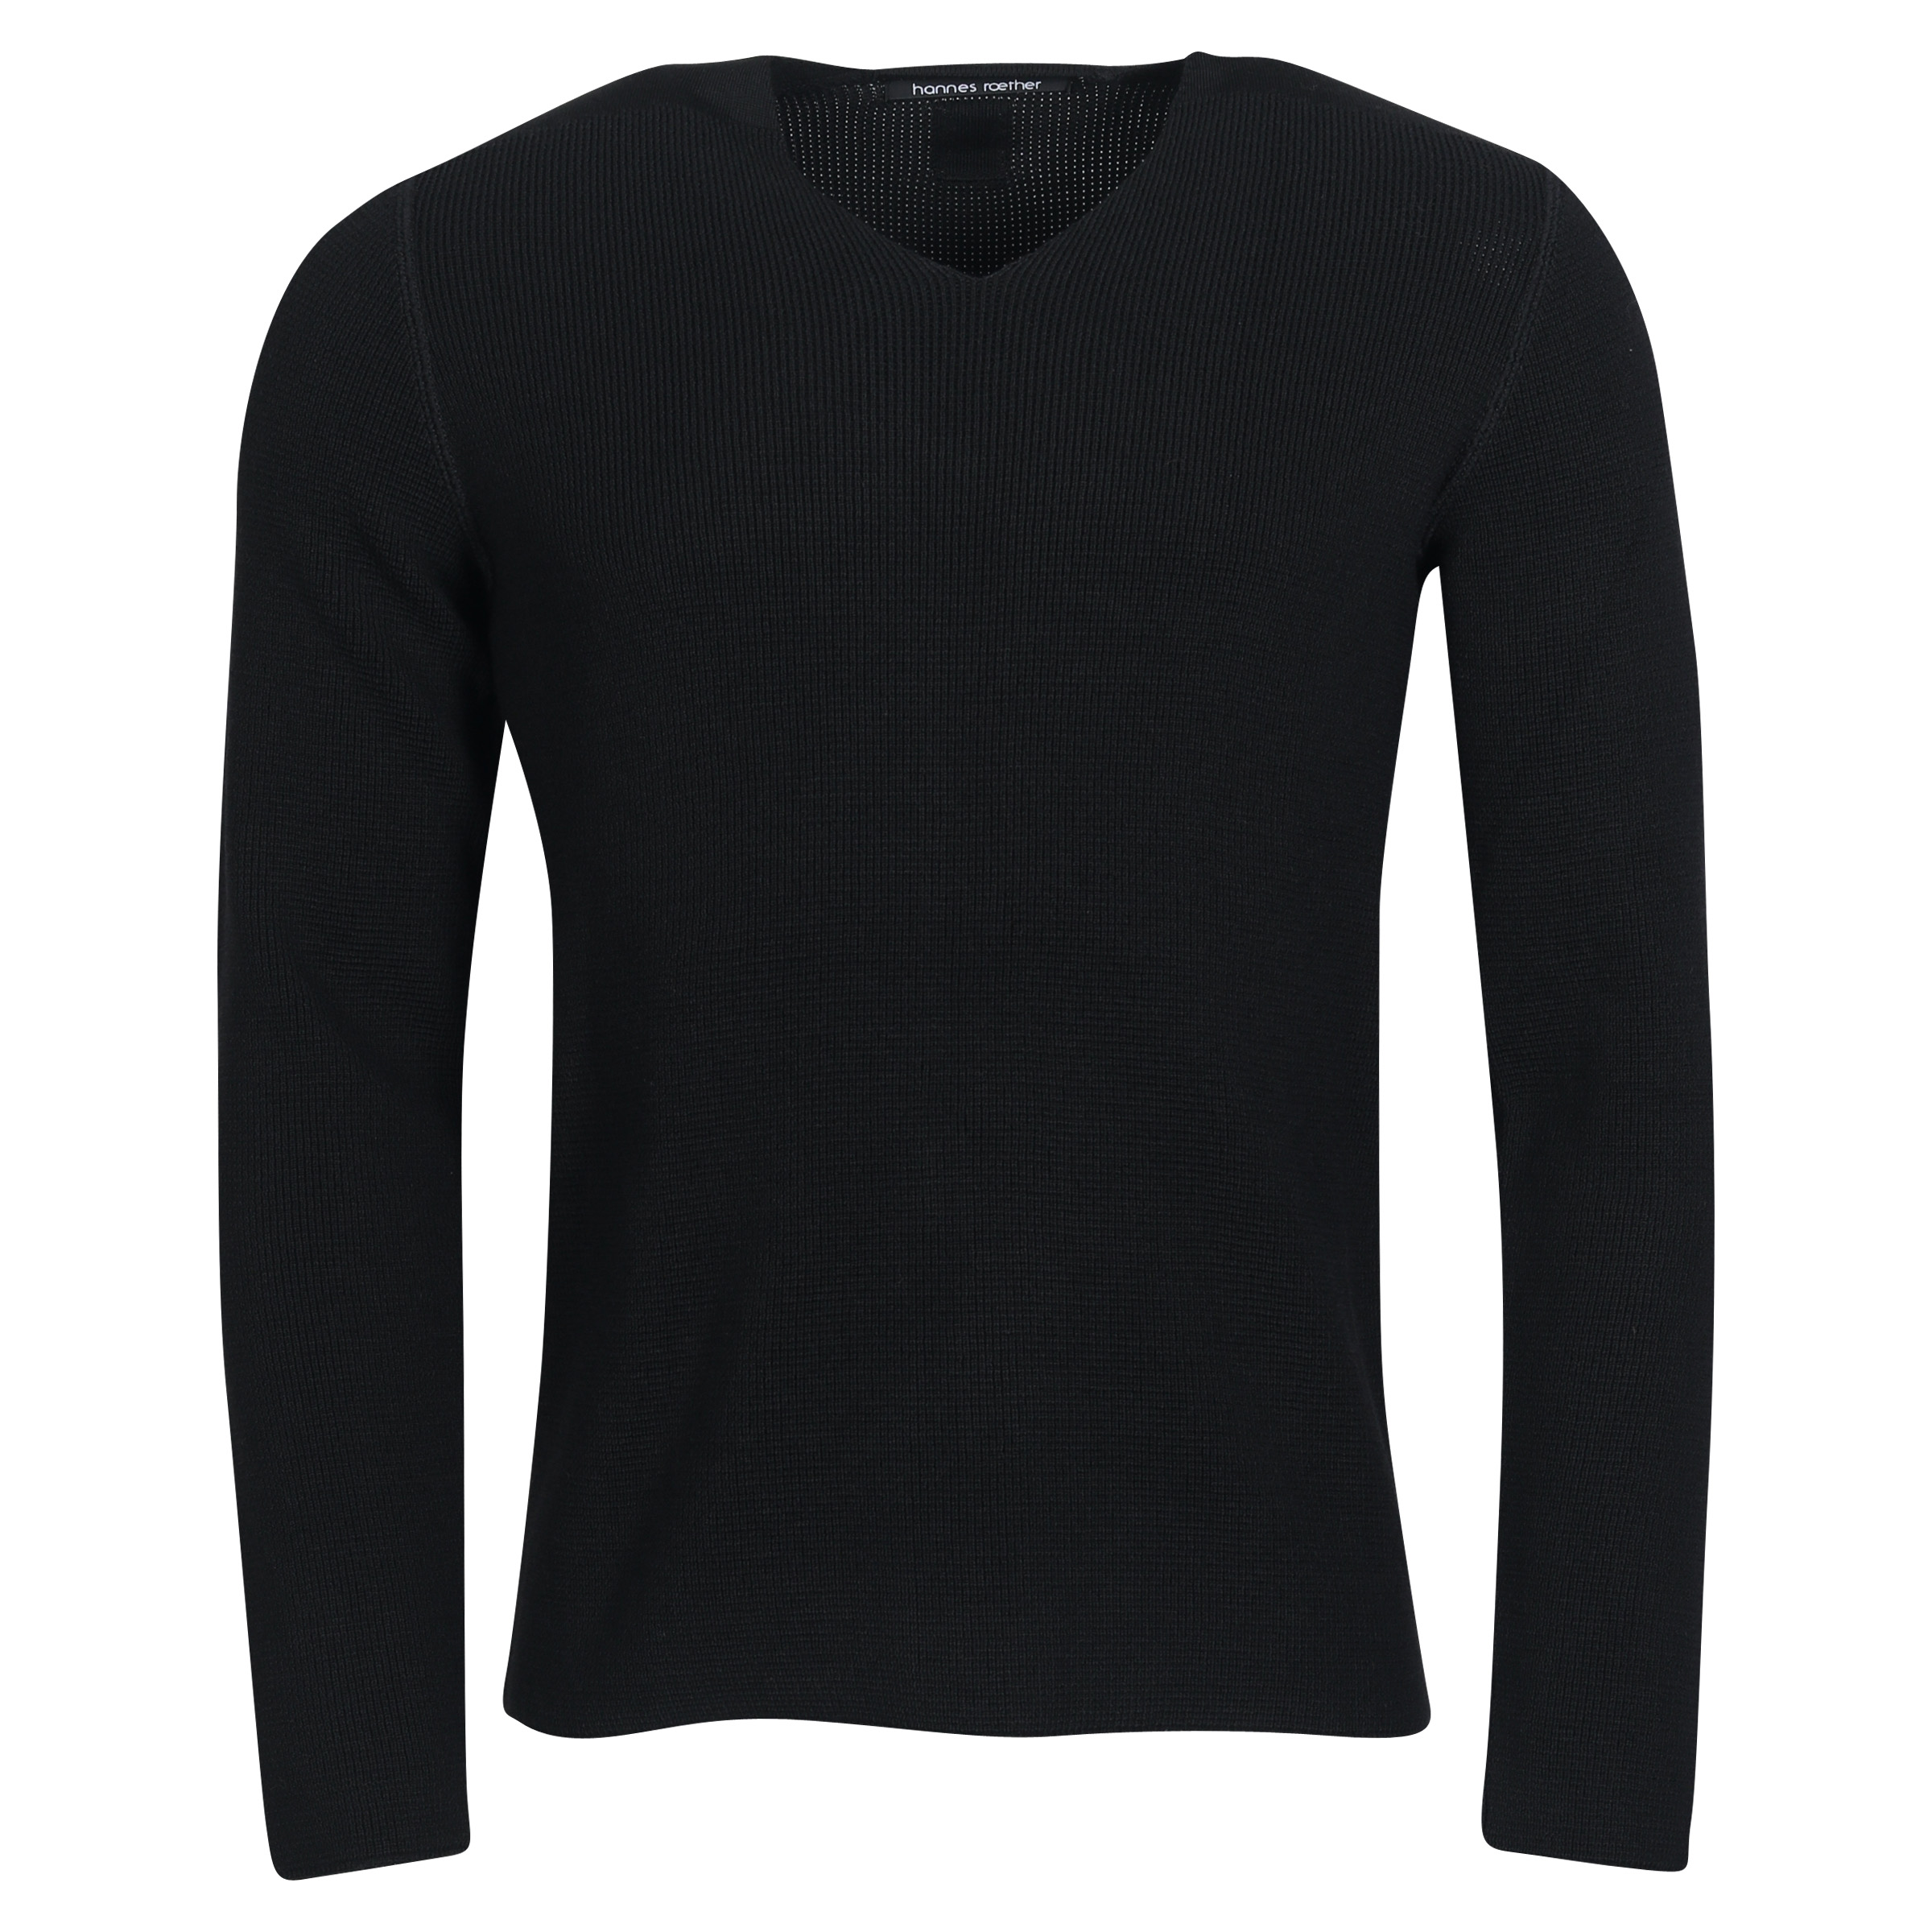 Hannes Roether Knit V-Neck Sweater in Black